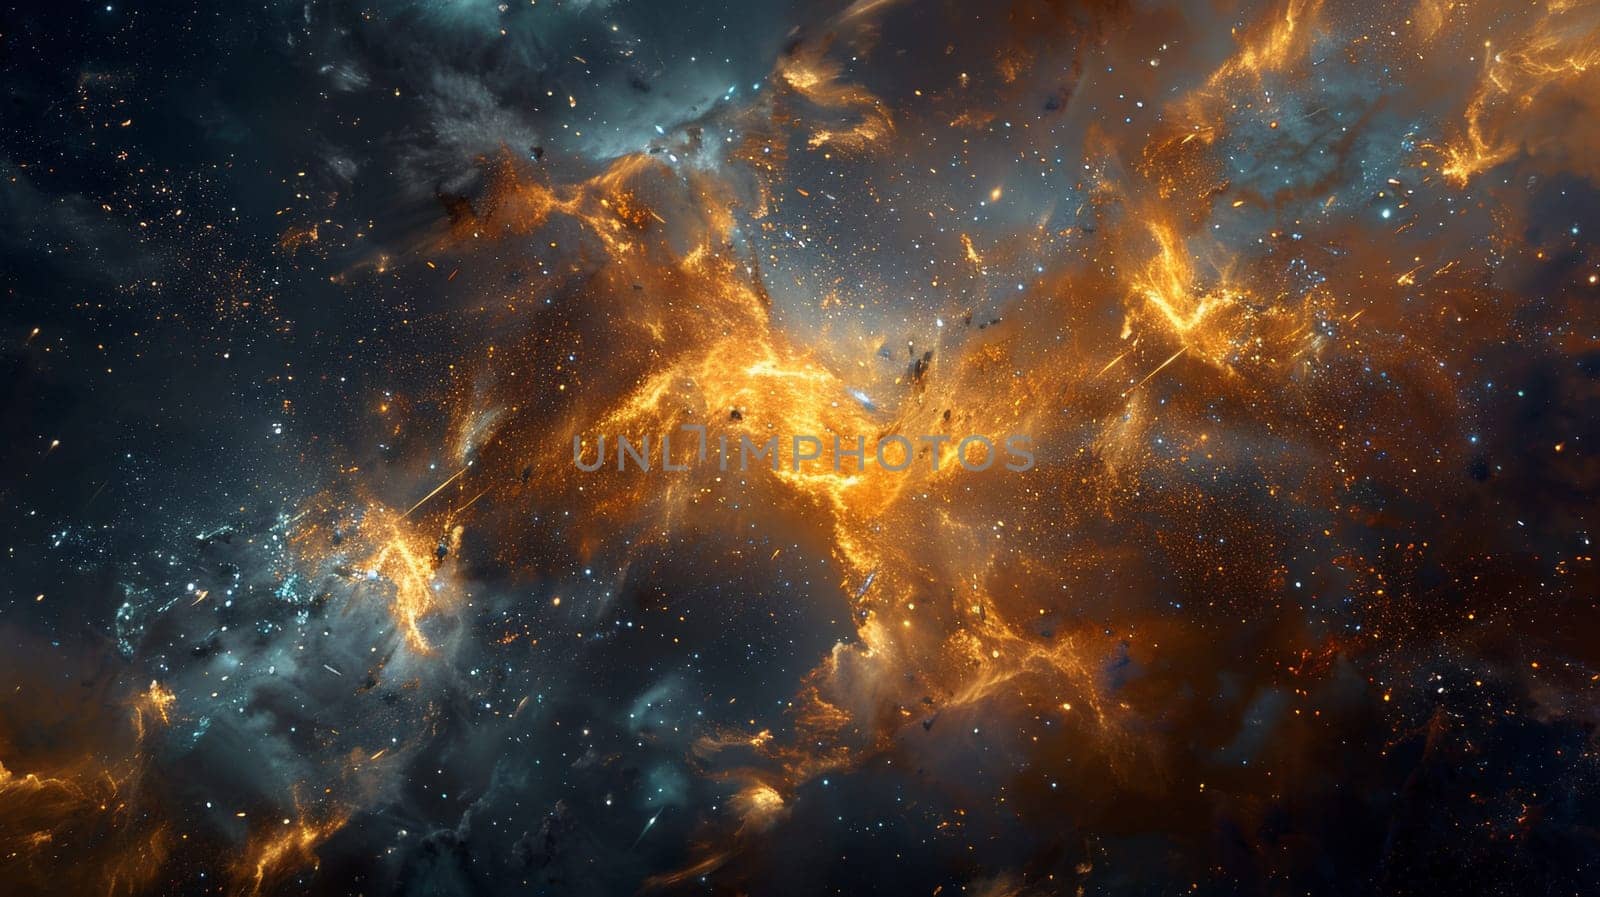 A close up of a space explosion with orange and blue flames